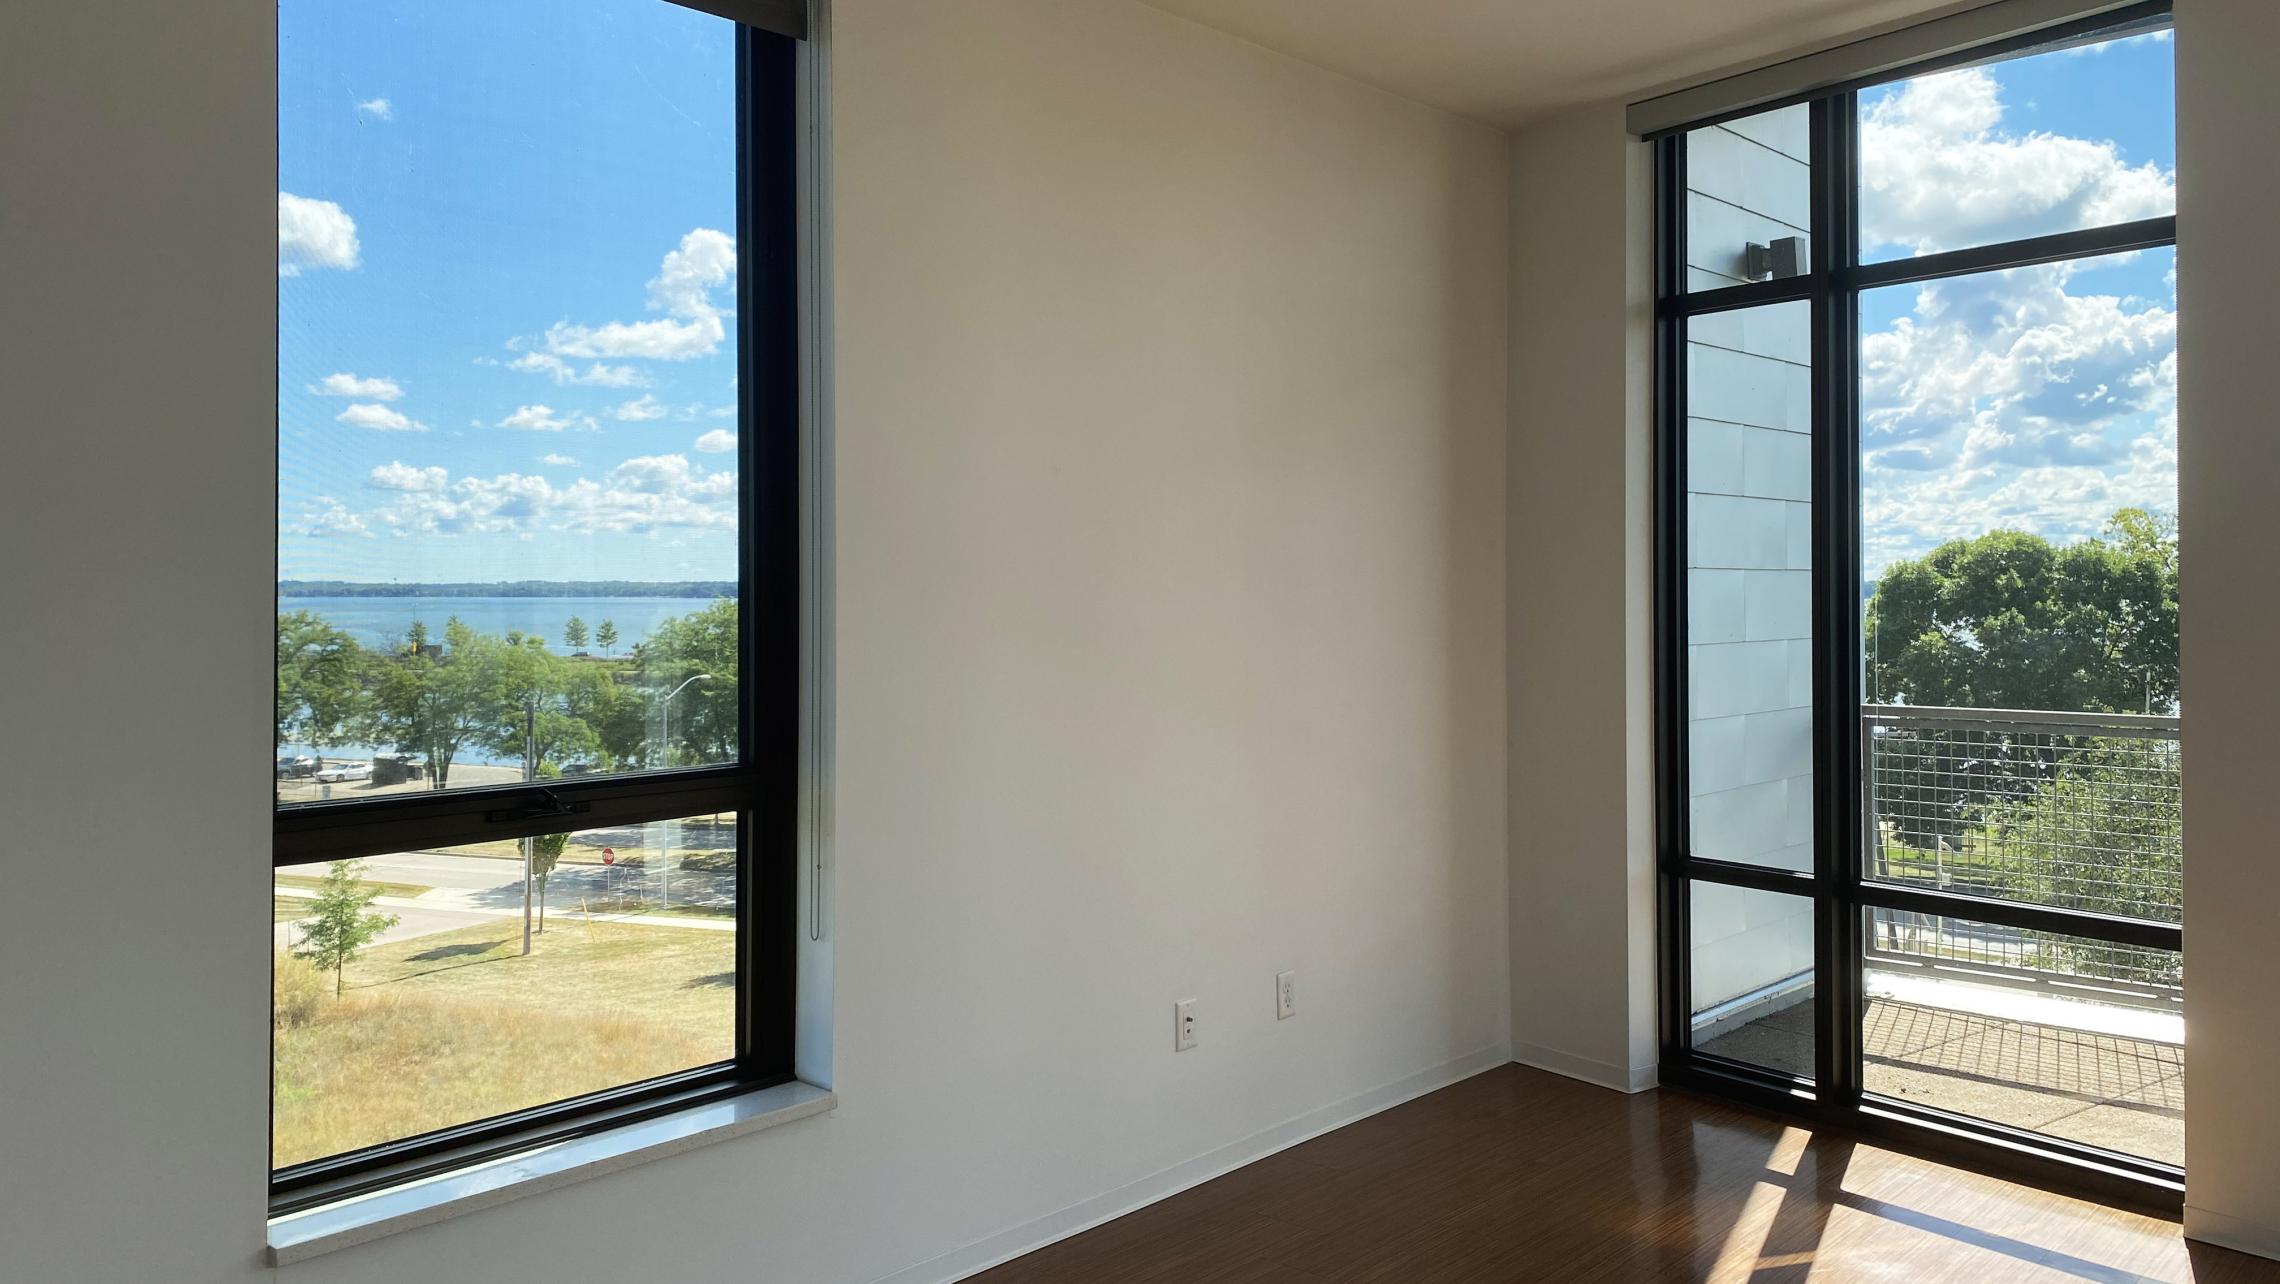 SEVEN27-at-The-Yards-Apartment-440-Two-bedroom-Corner-Lake-View-Modern-Upscale-Design-Balcony-Terrace-Fitness-Lounge-Courtyard-Dogs-Cats